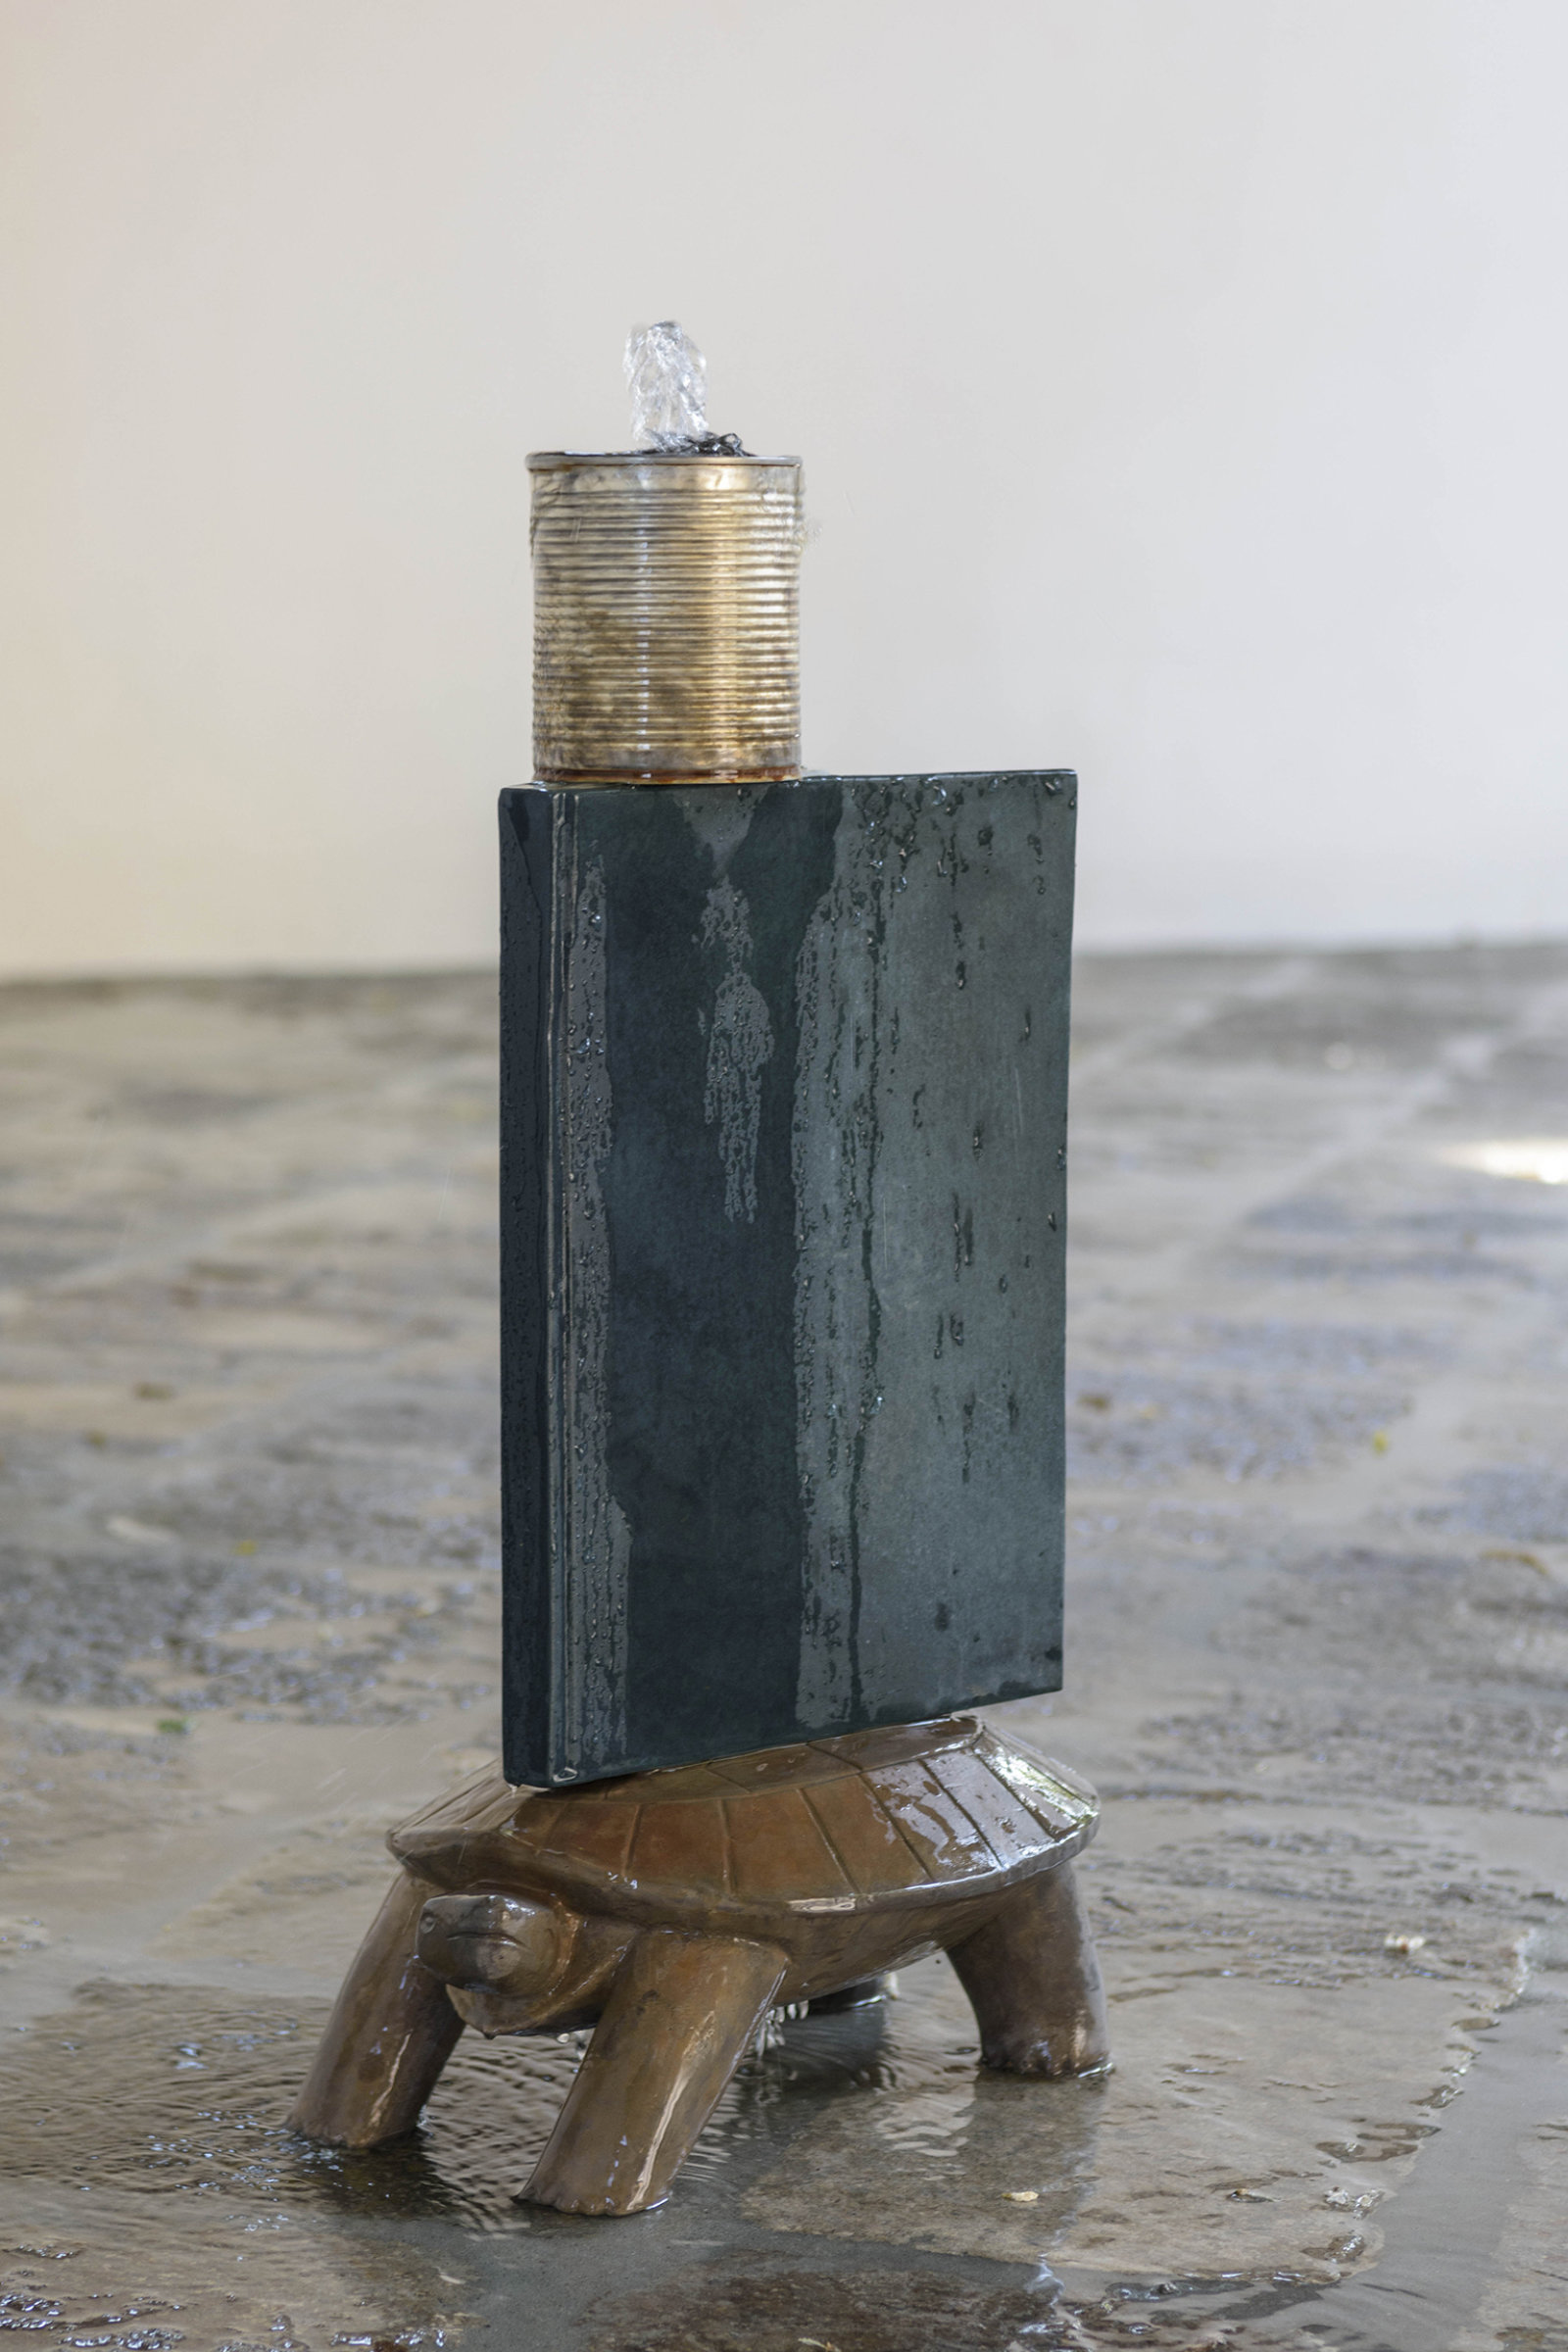 Geoffrey Farmer, Turtle, 2017, cast bronze, tin can, waterworks, 28 x 12 x 9 in. (70 x 30 x 22 cm). Installation view, A way out of the mirror, Canada Pavilion, 57th Venice Biennale, Venice, Italy